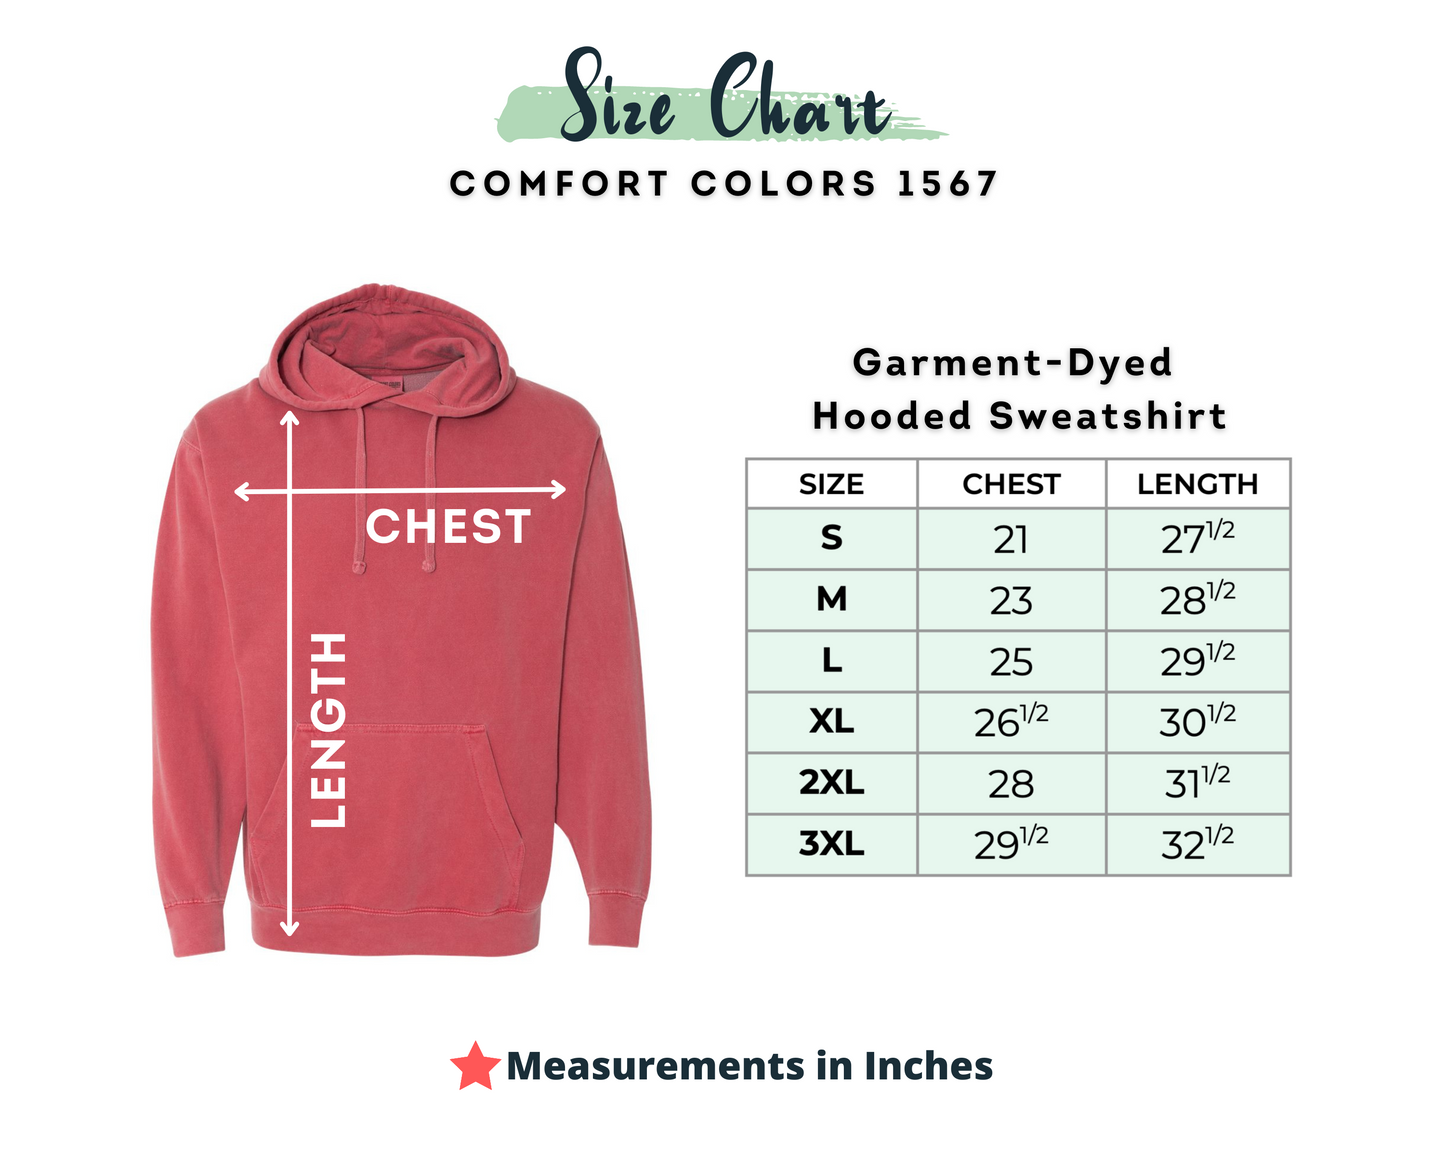 Taylor Swift inspired "Lover” Hoodie